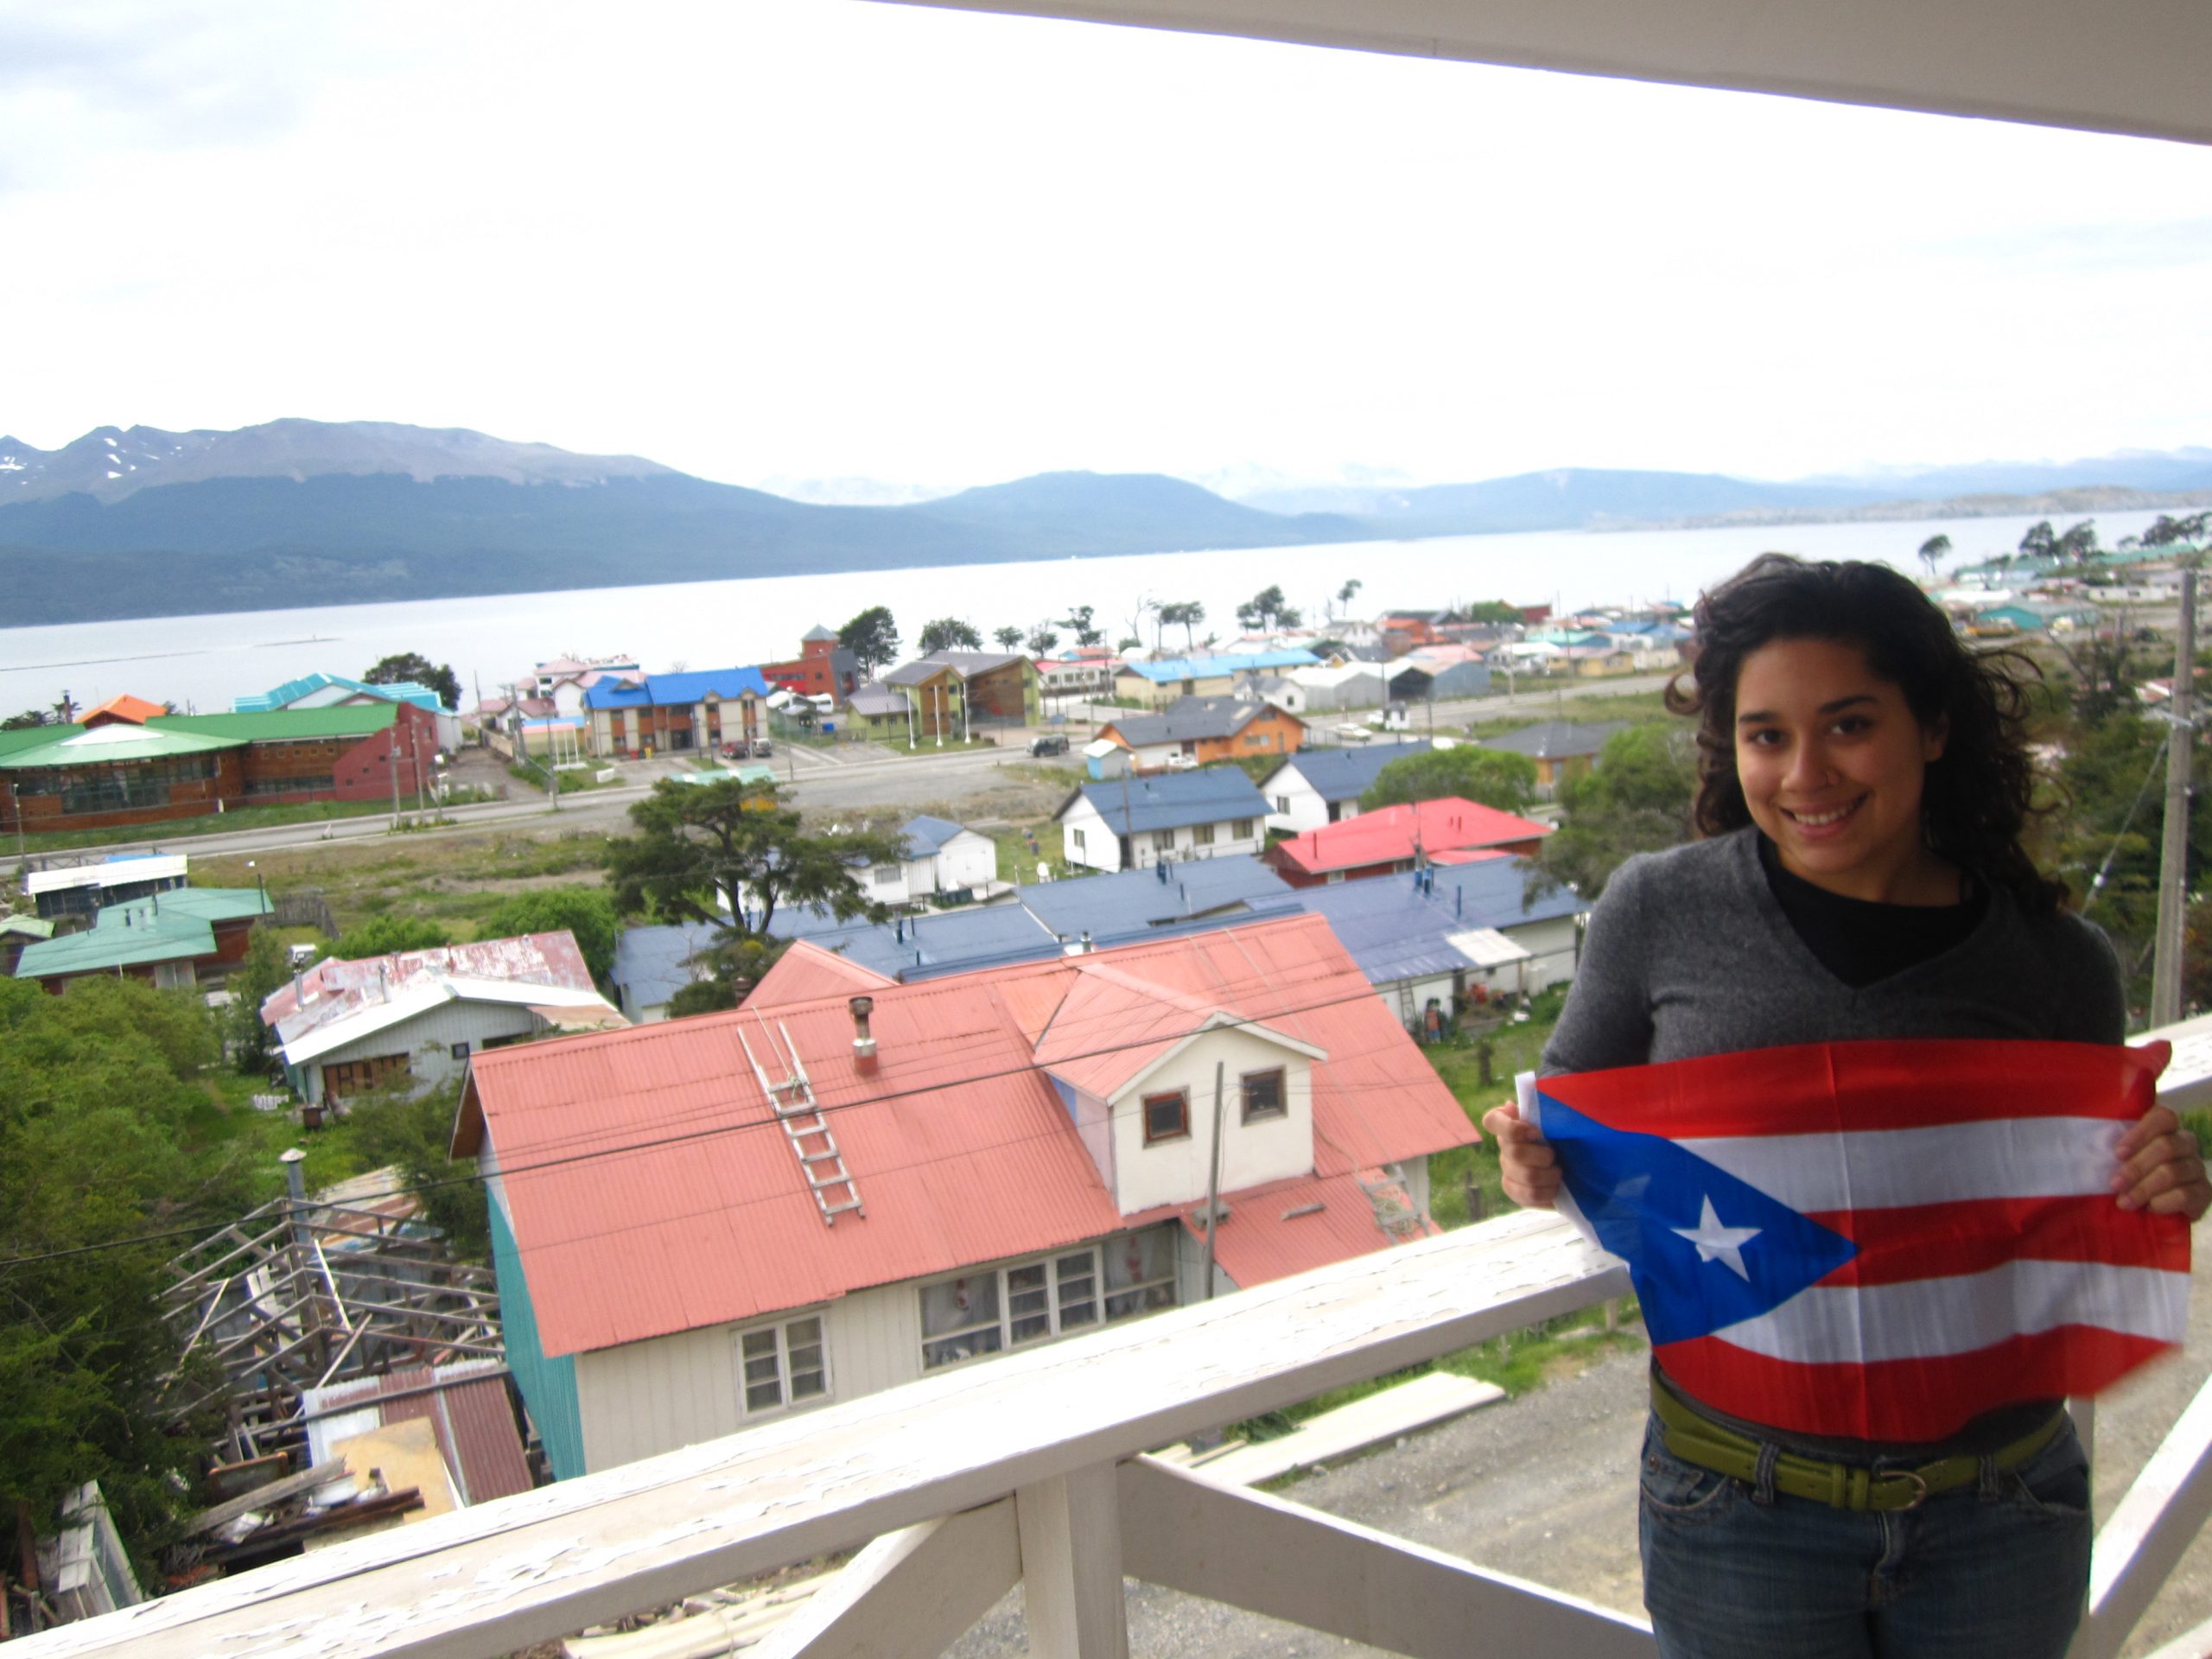 SEEDS Alumna Betsabé Castro studies artificial selection of medicinal and edible traits in plants native to Puerto Rico, the Dominican Republic, and other Caribbean islands.